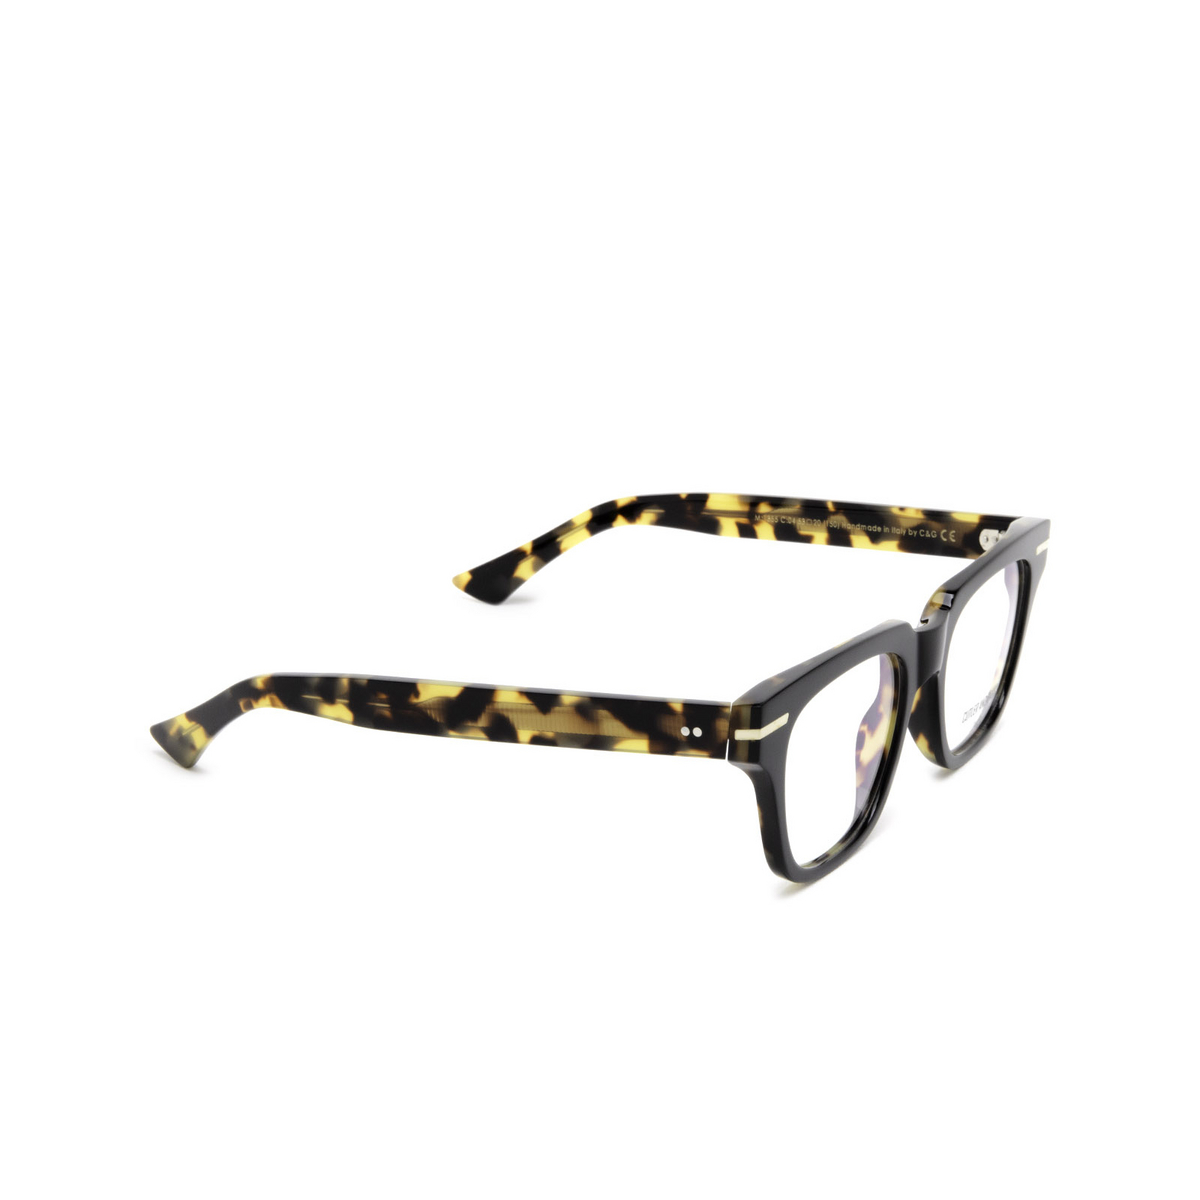 Cutler and Gross 1355 Eyeglasses 04 Black Taxi on Camo - 2/4